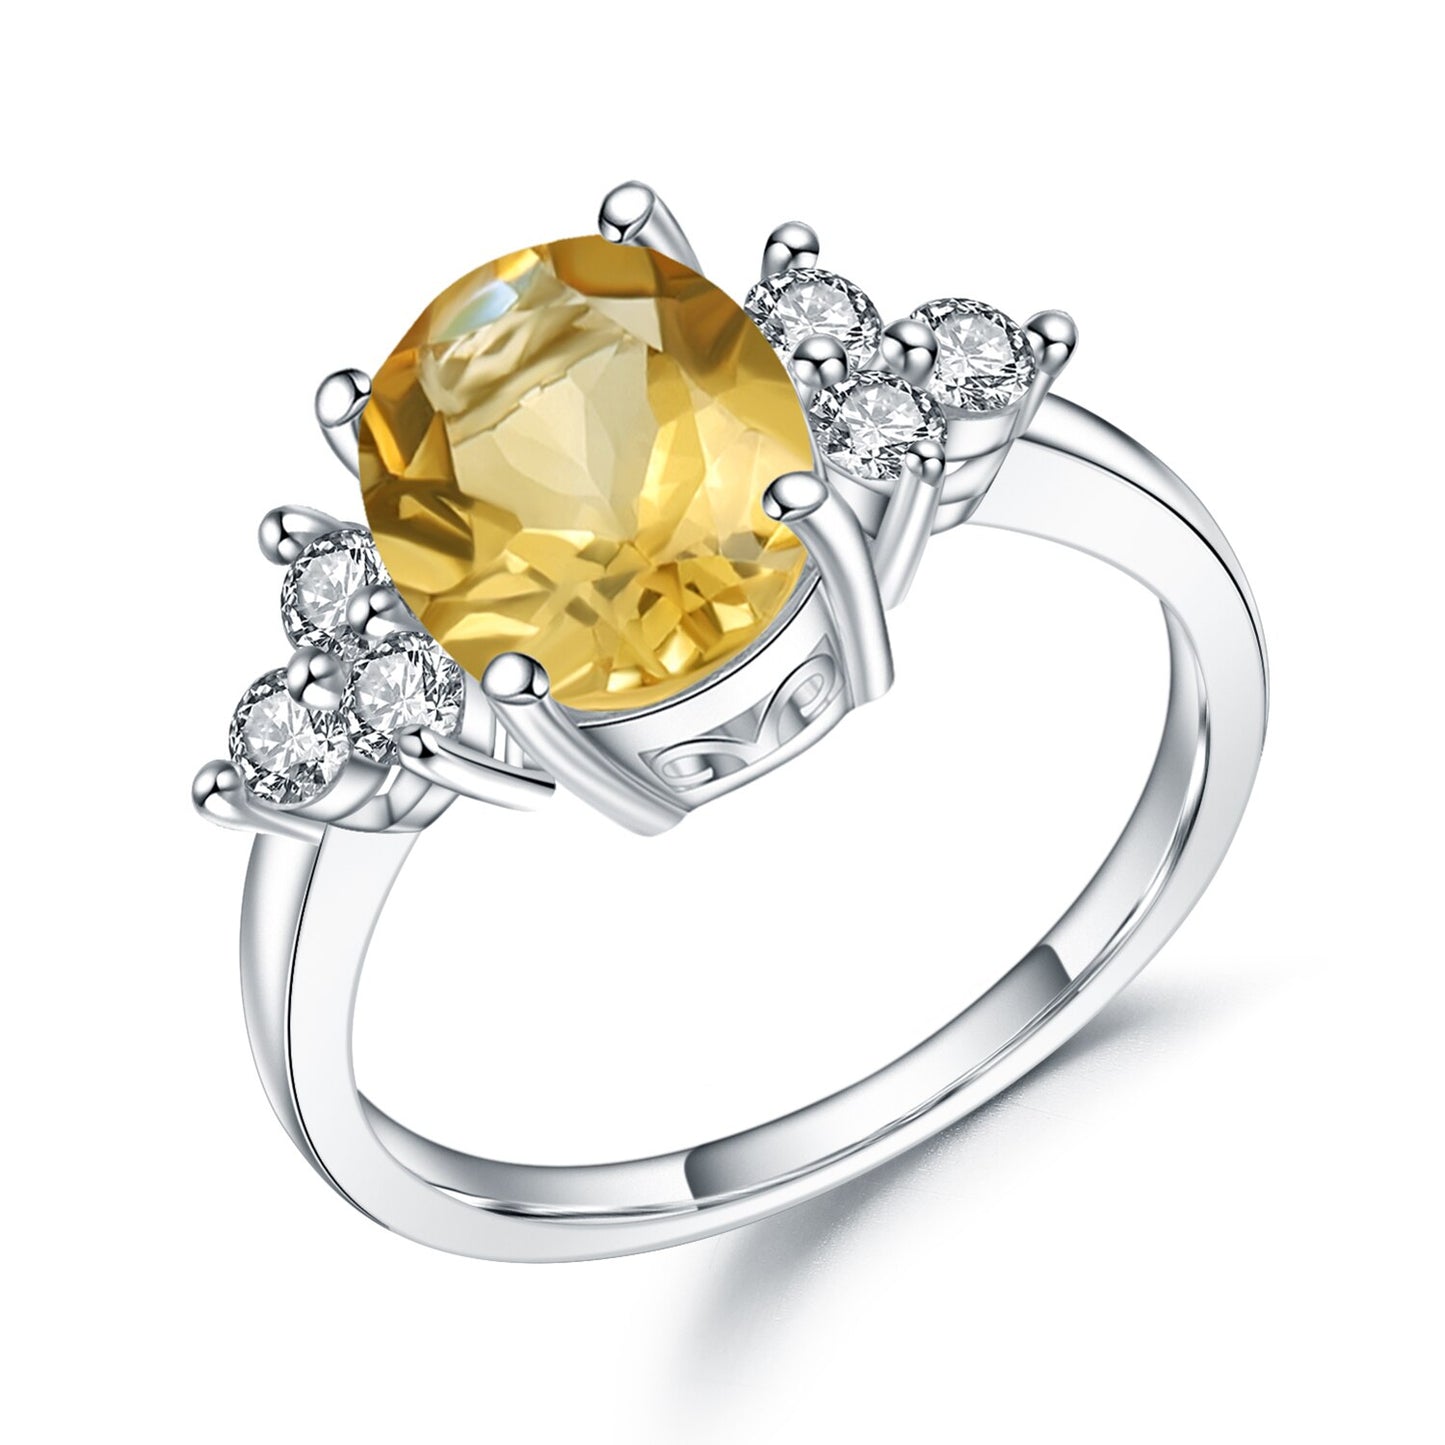 GEM&#39;S BALLET Classic Oval 2.60Ct Natural Citrine Anniversary Rings For Women 925 Sterling Silver Gemstone Ring Fine Jewelry Citrine|925 Sterling Silver